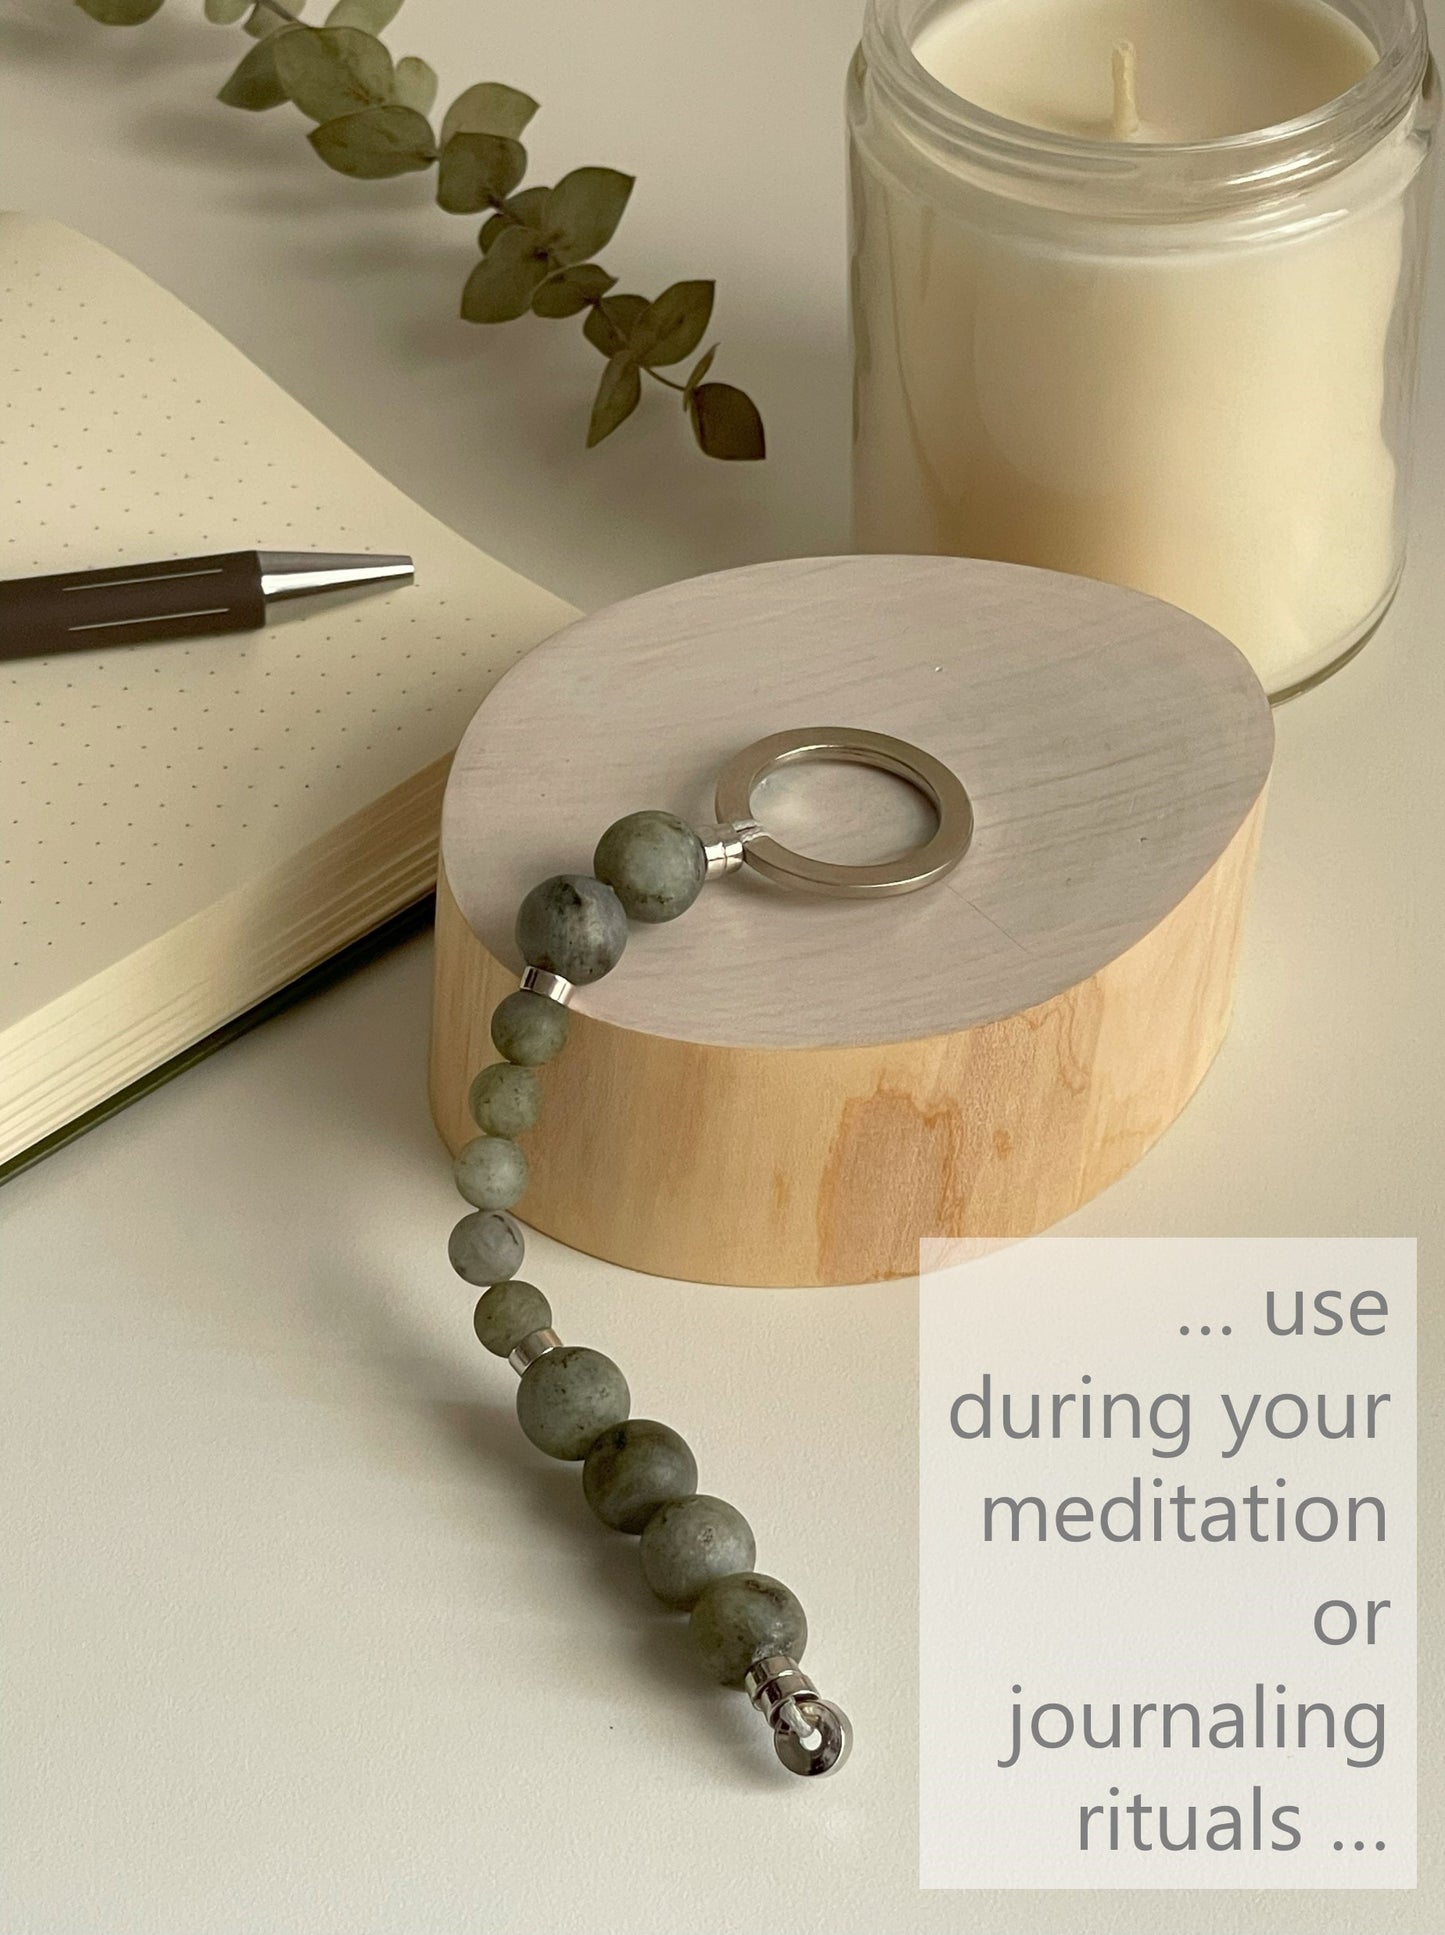 Labradorite Meditation & Breathing Beads - Intuition and Transformation